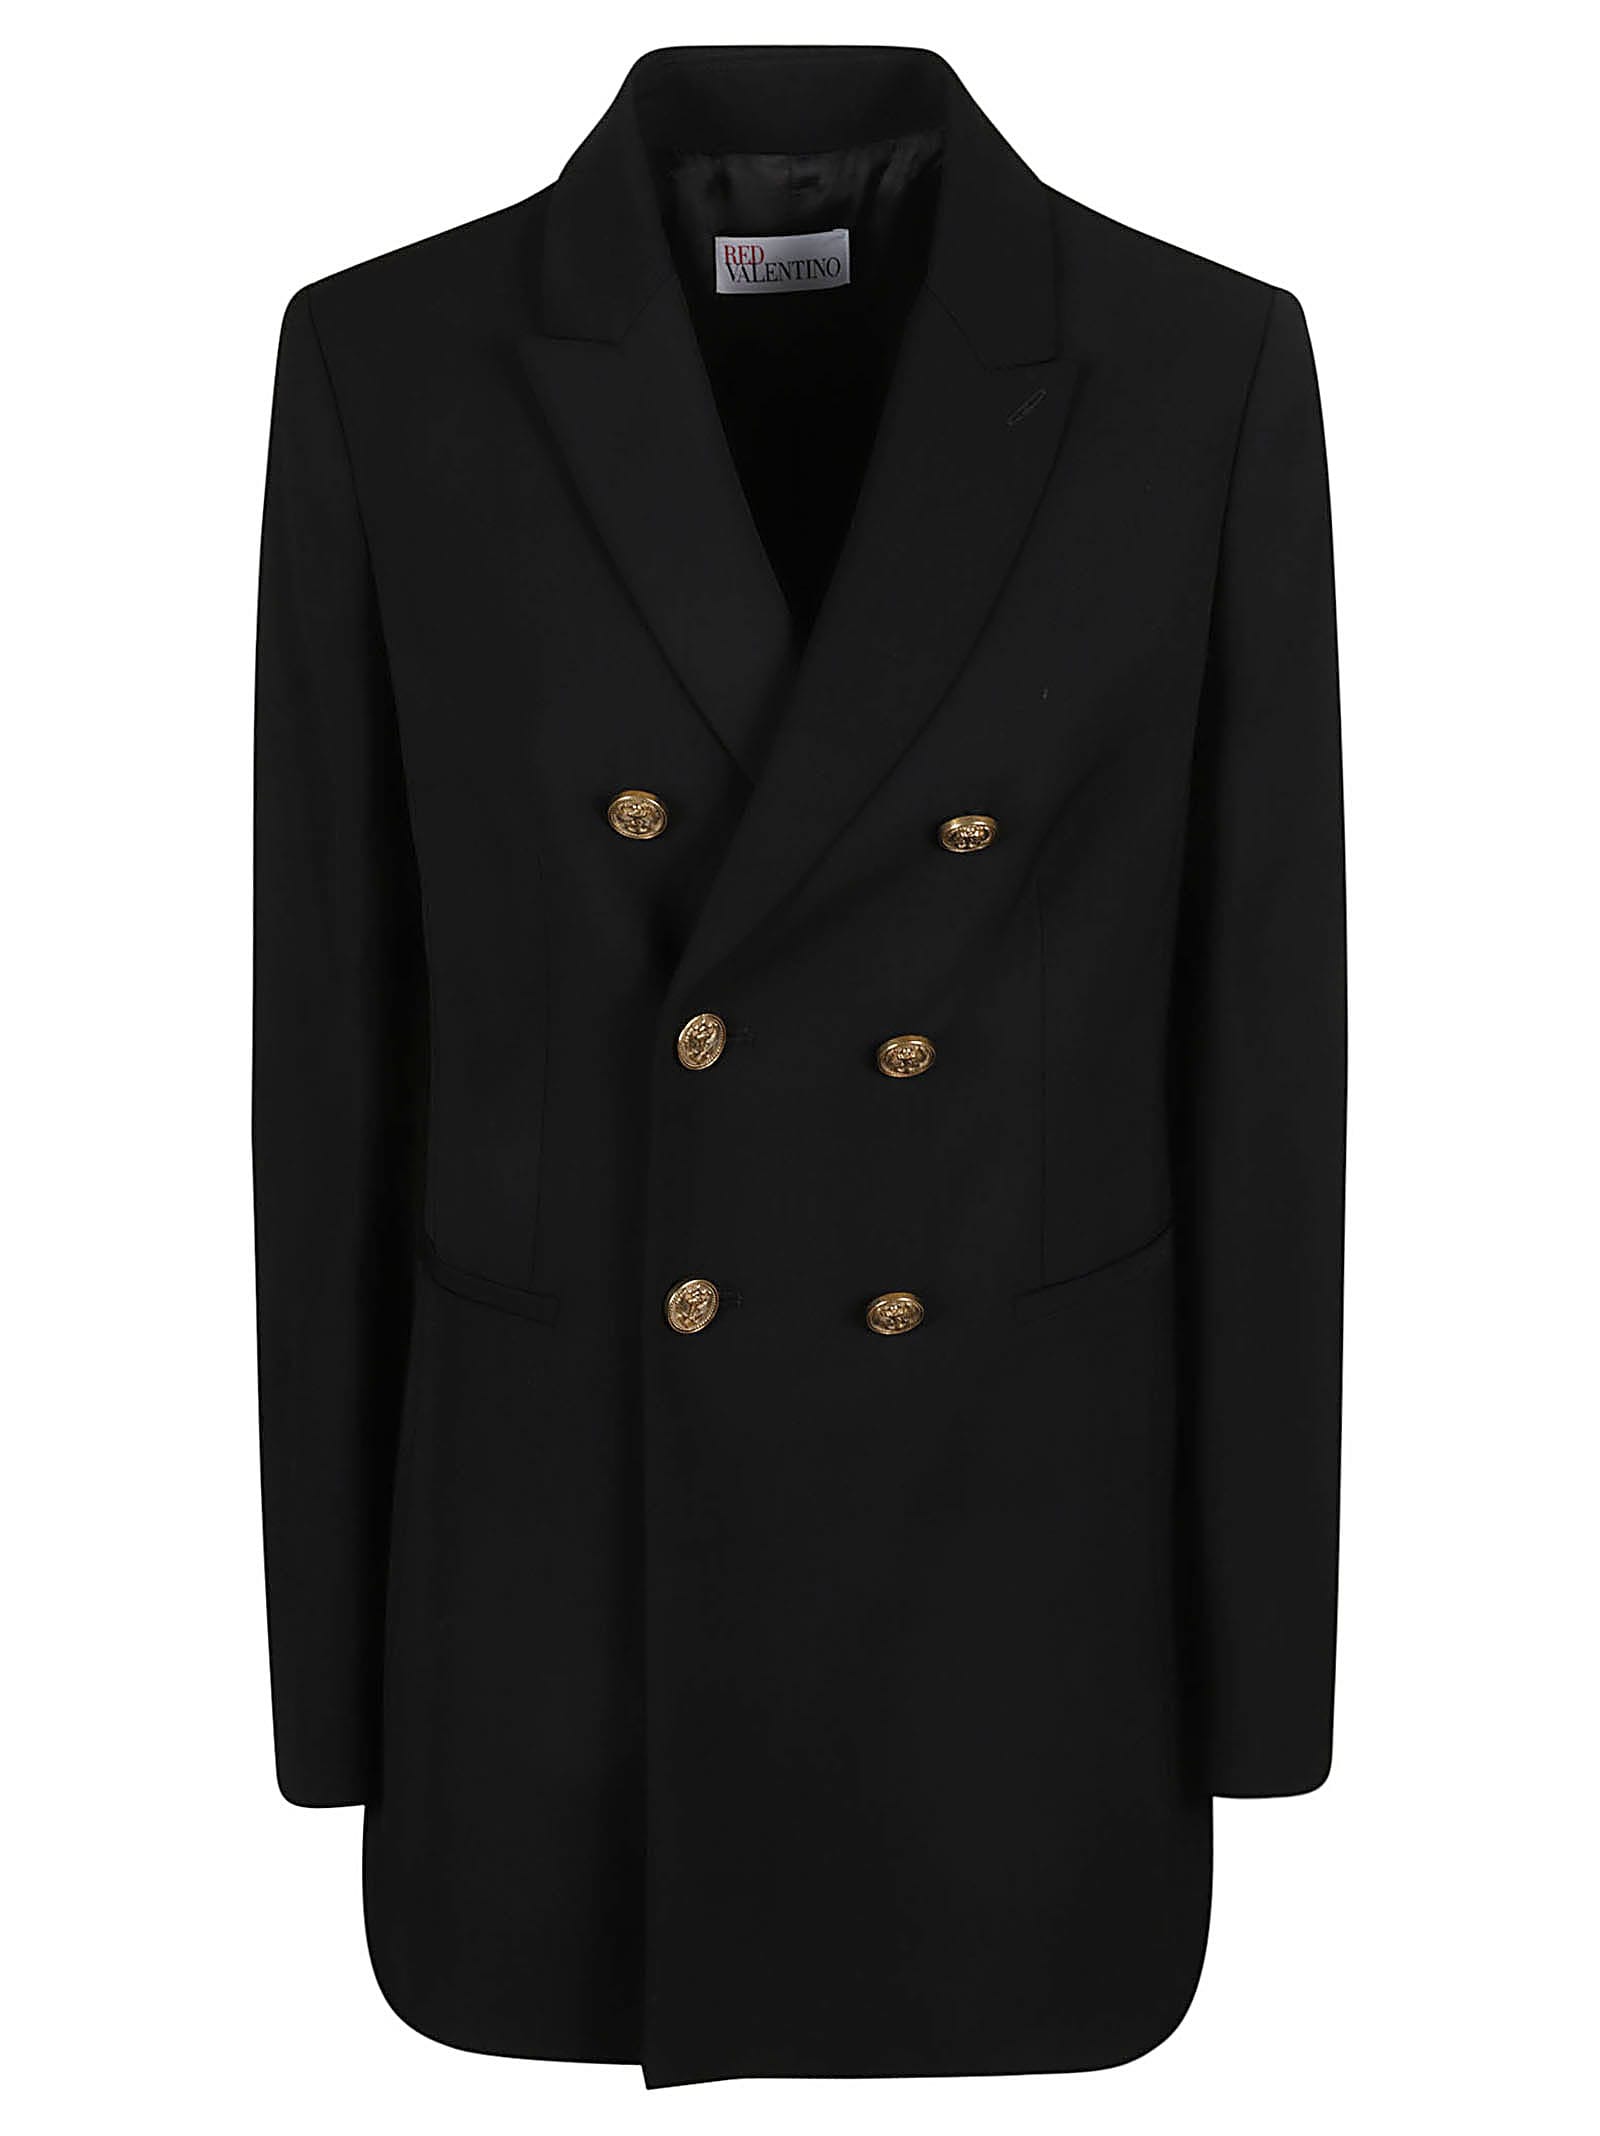 RED VALENTINO DOUBLE-BREASTED PLAIN DINNER JACKET